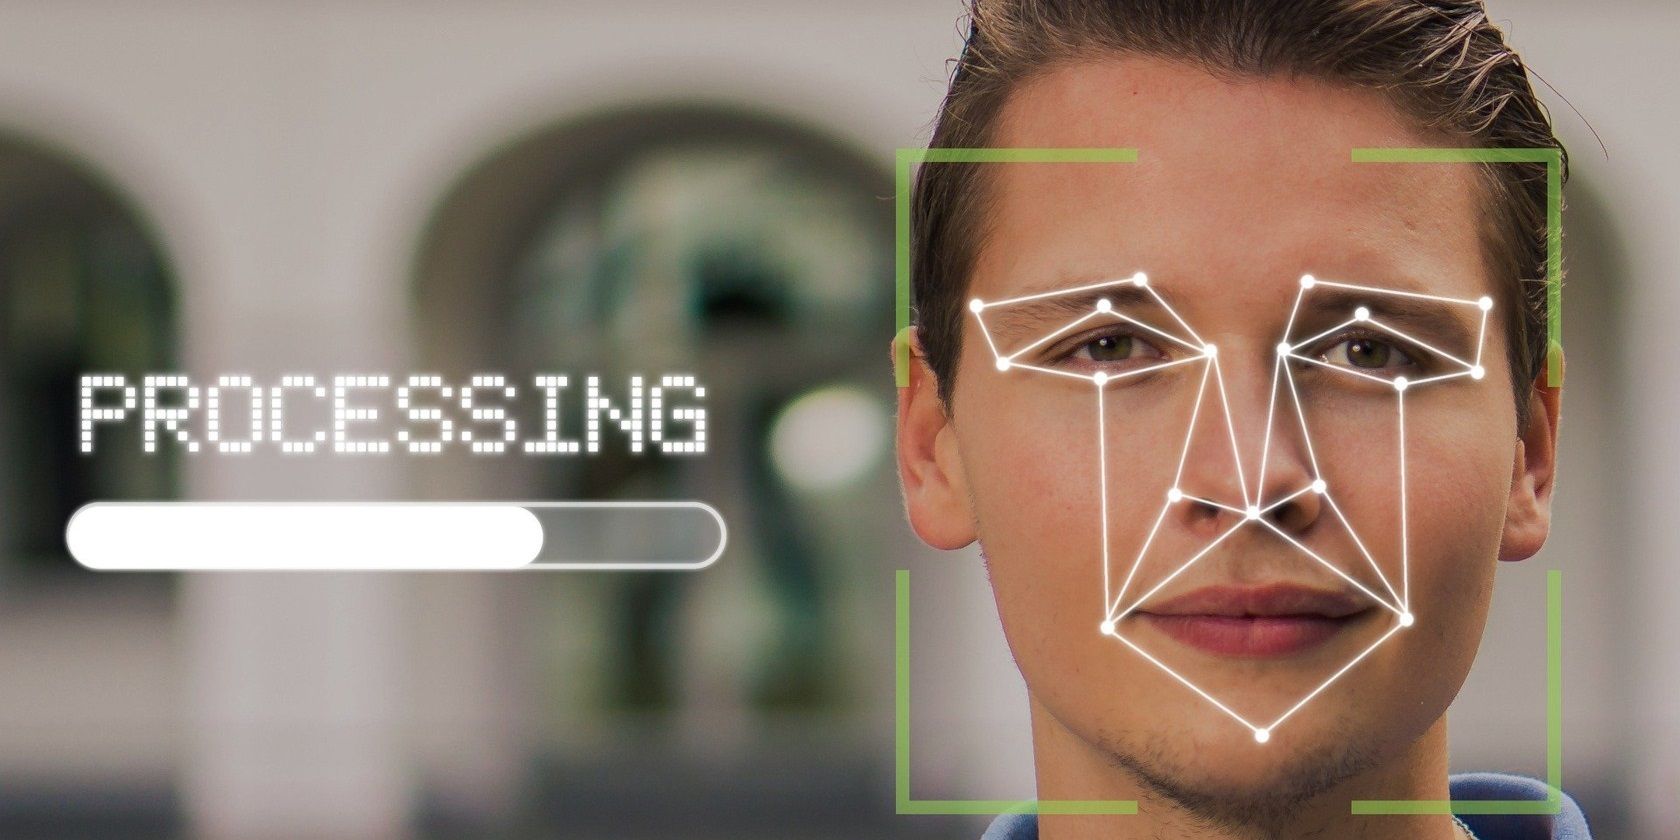 Facial recognition patterns on a face